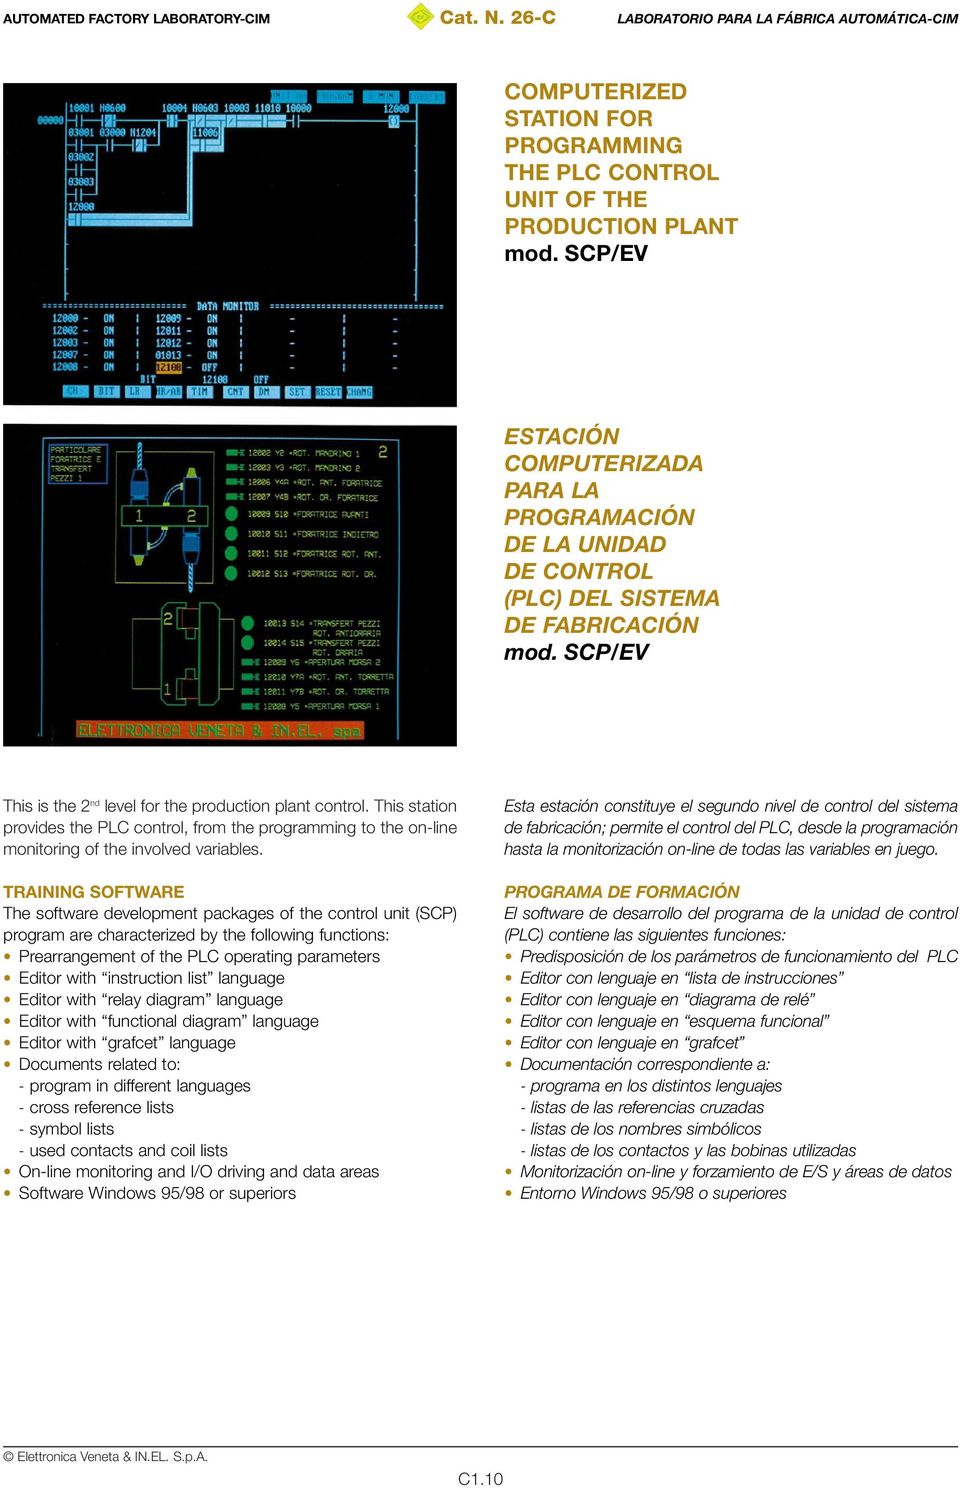 This station provides the PLC control, from the programming to the on-line monitoring of the involved variables.